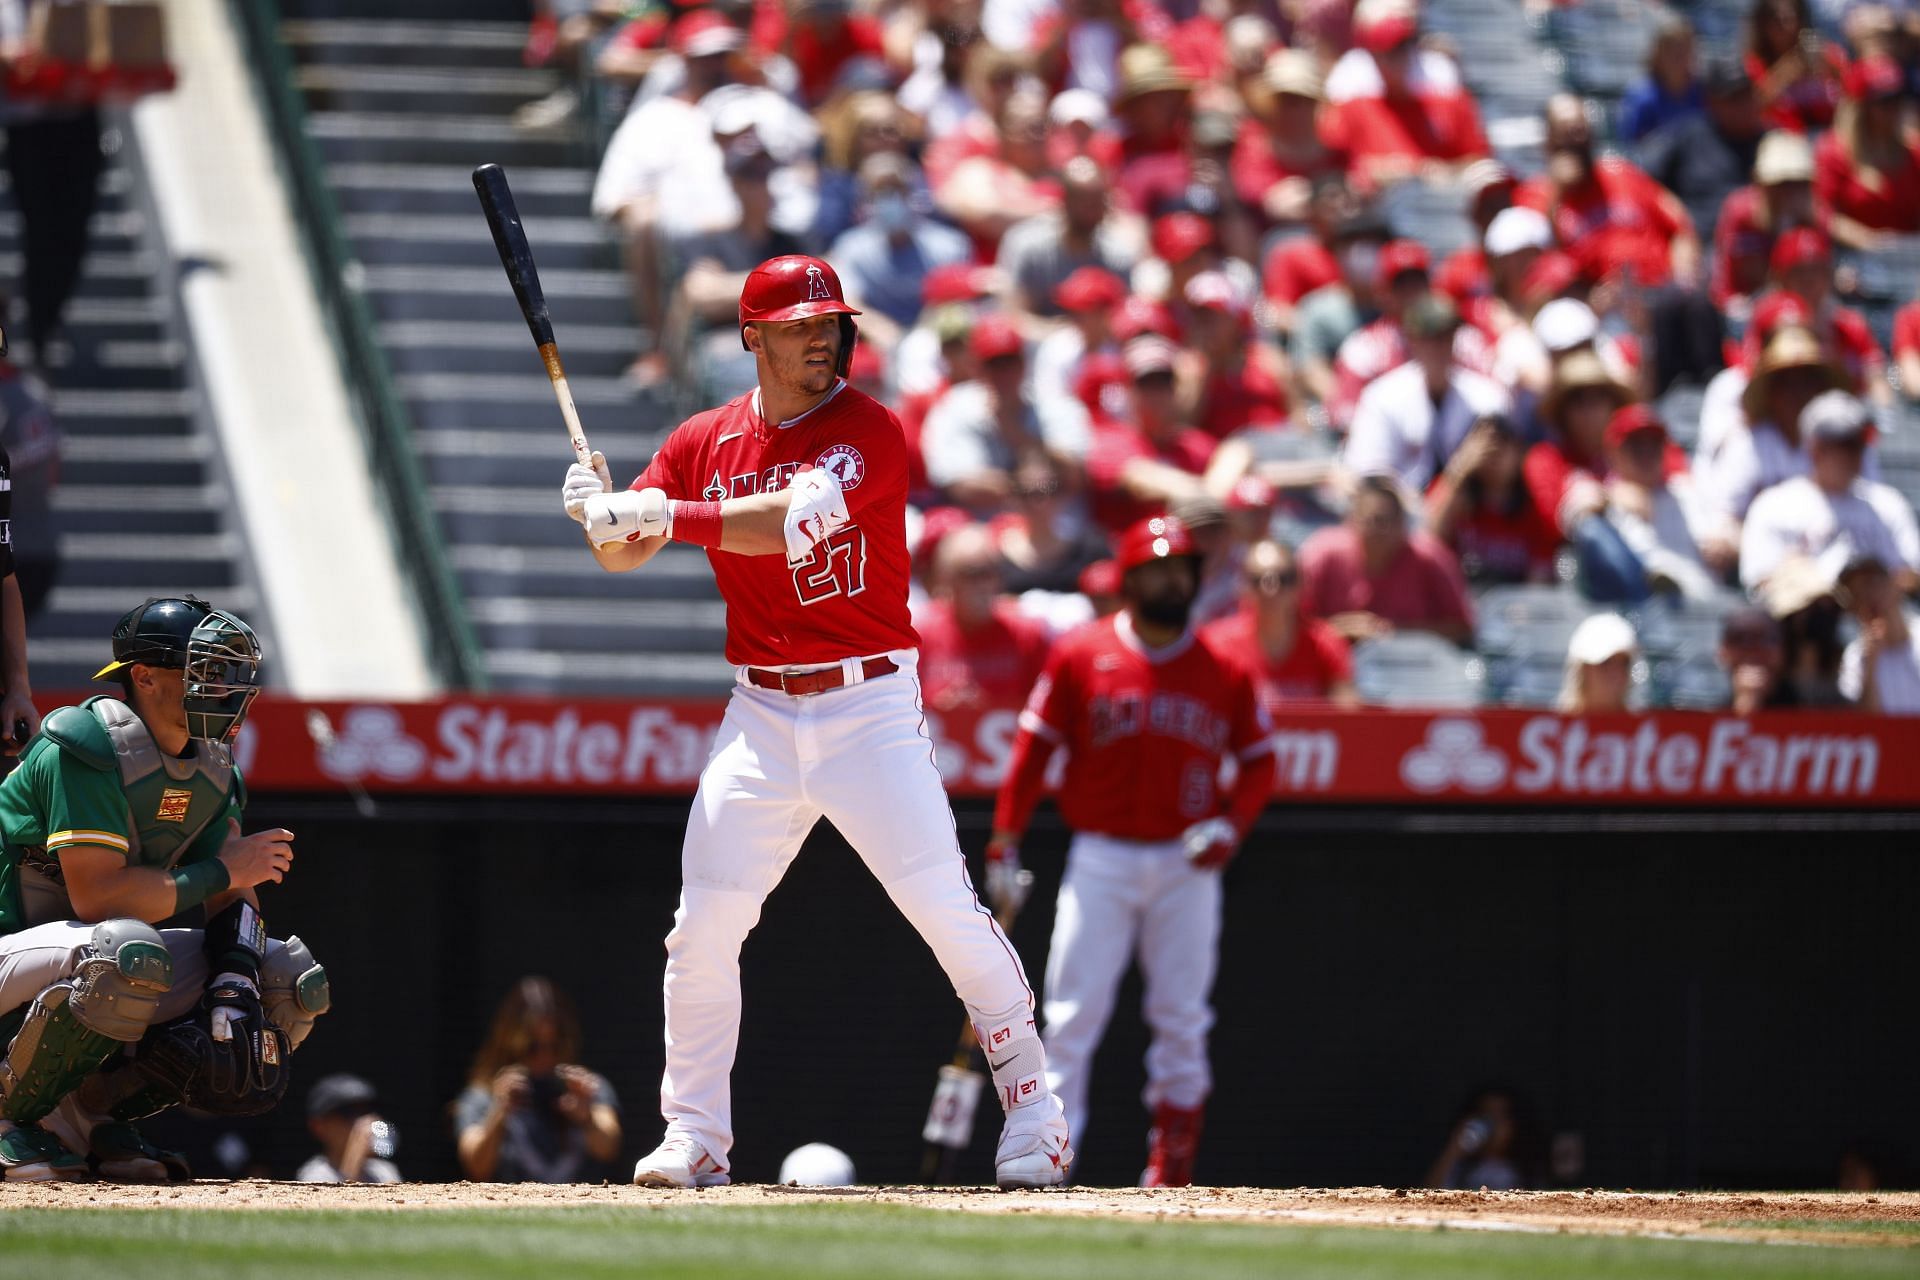 Los Angeles Angels former MVP Trout hit an RBI infield single along with his 12th homer of the year to gain praise from NBA star Zach LaVine.